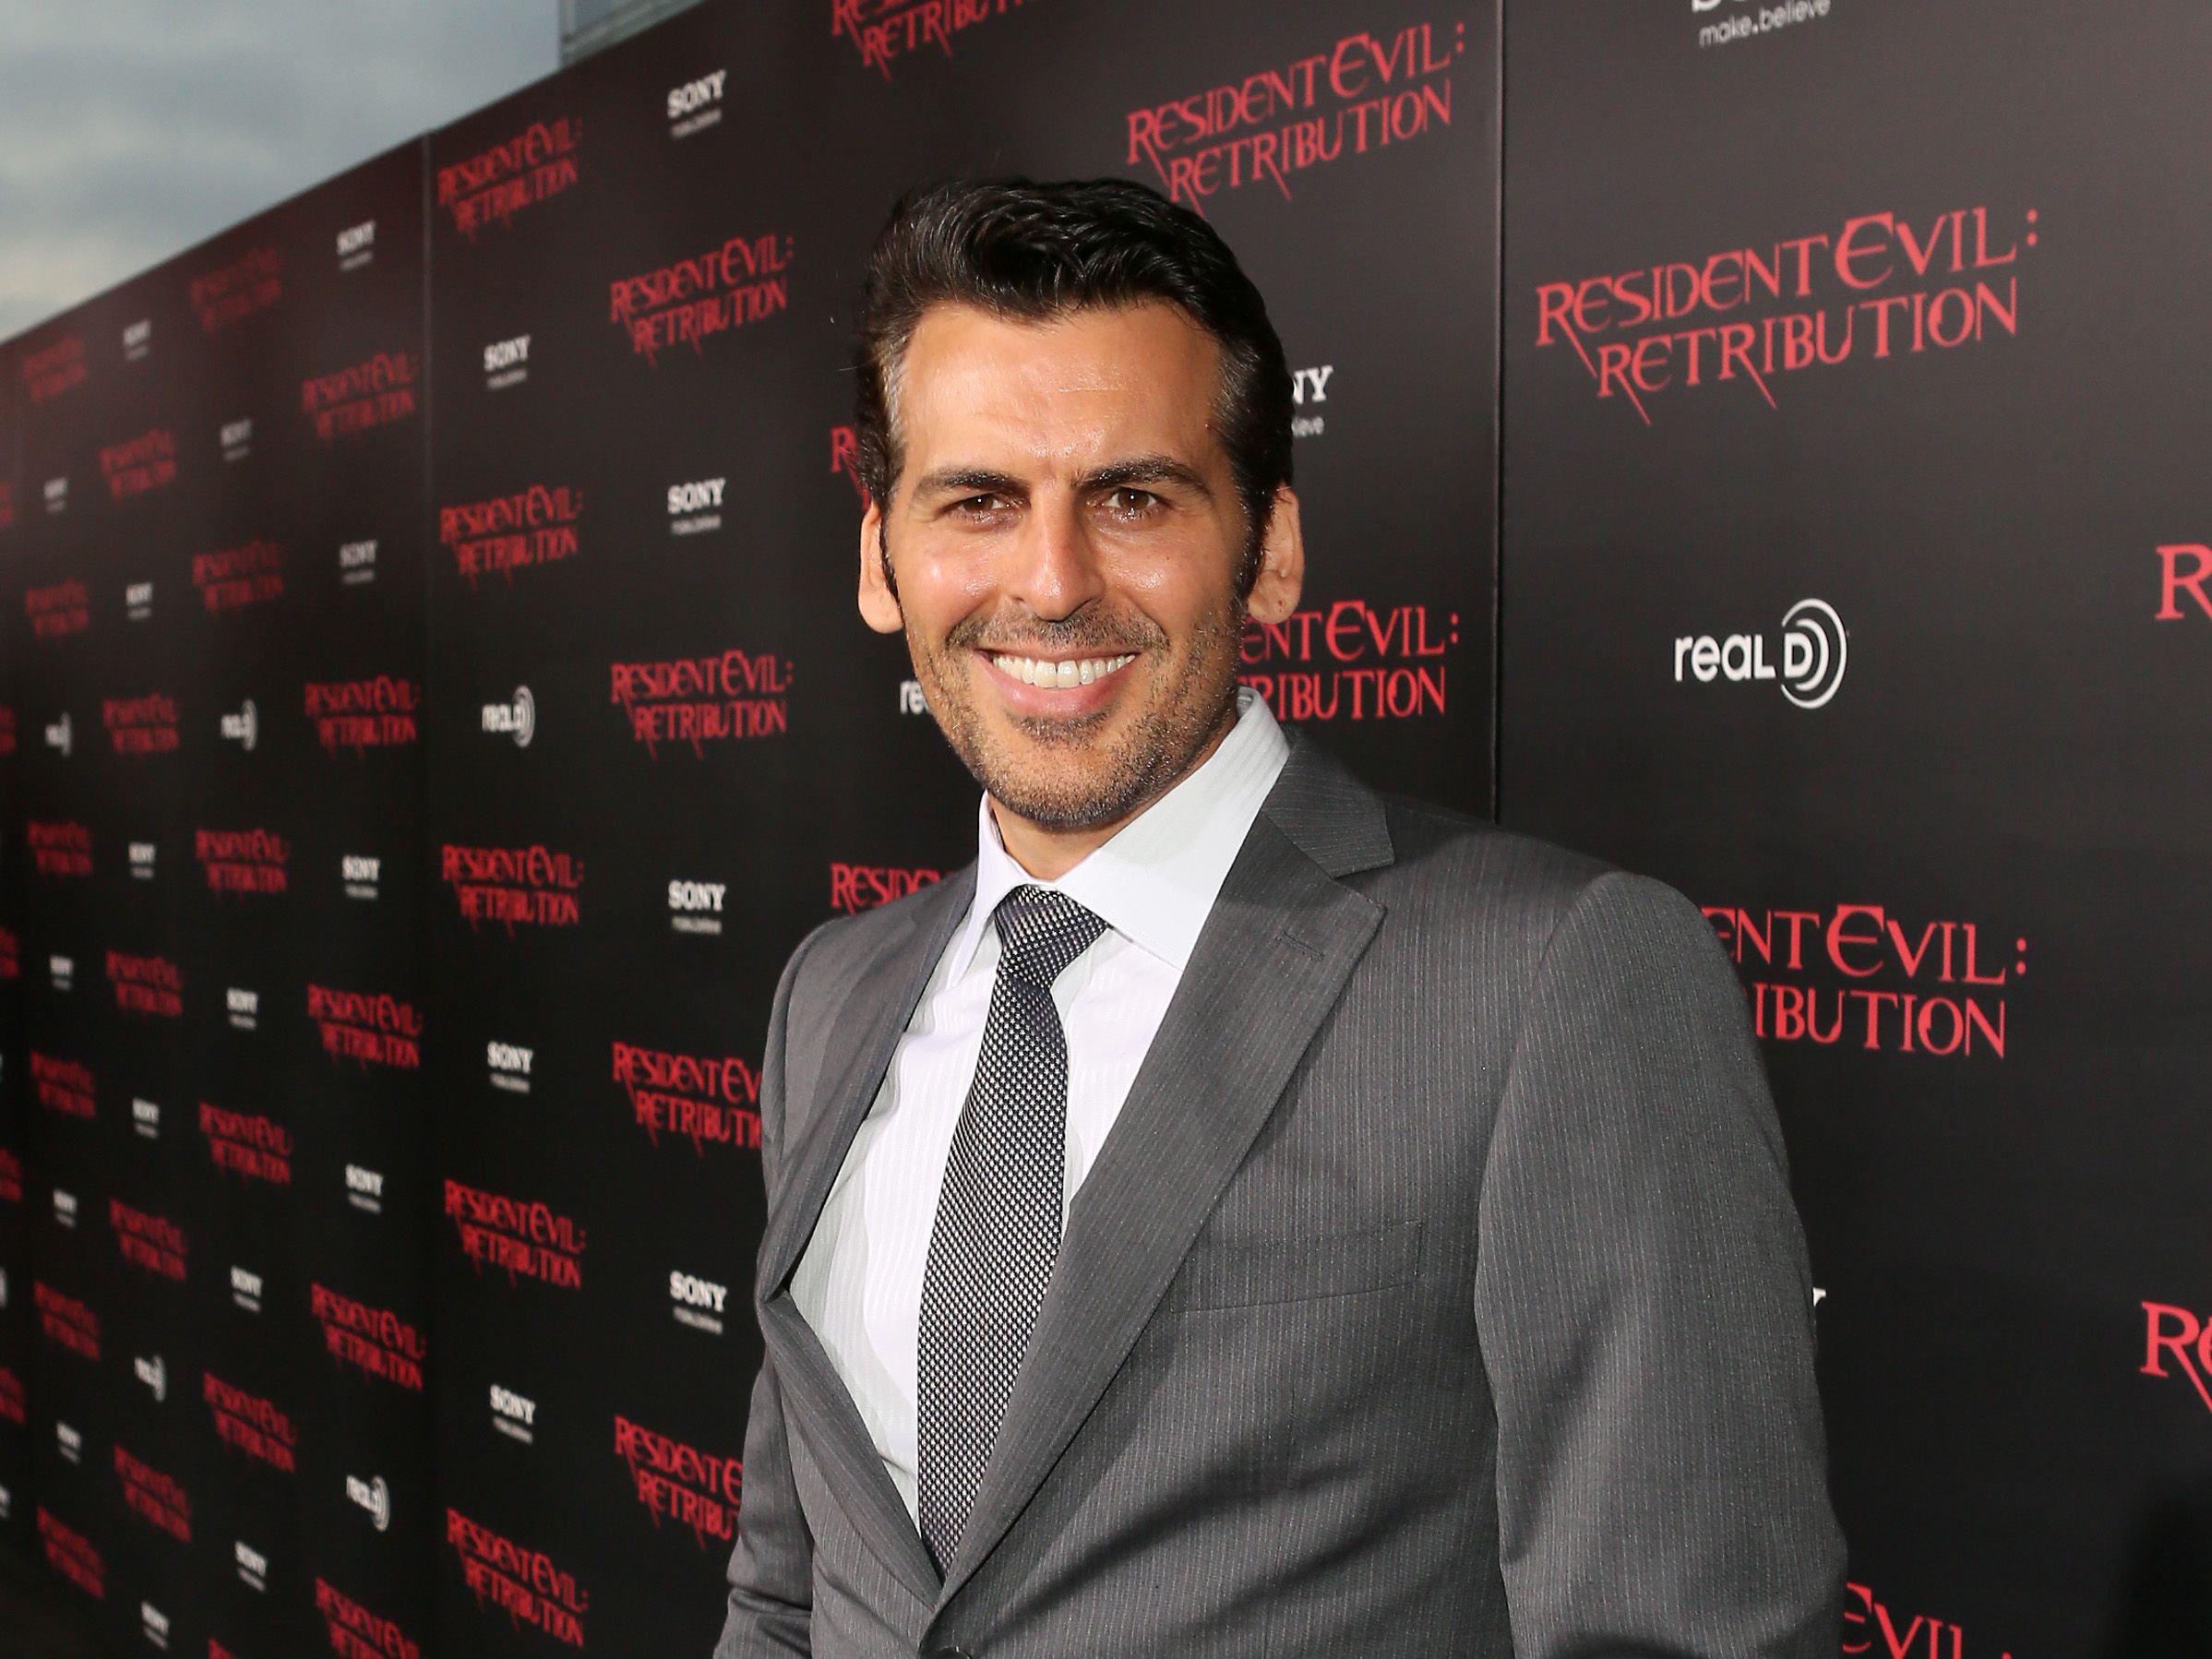 oded fehr wife